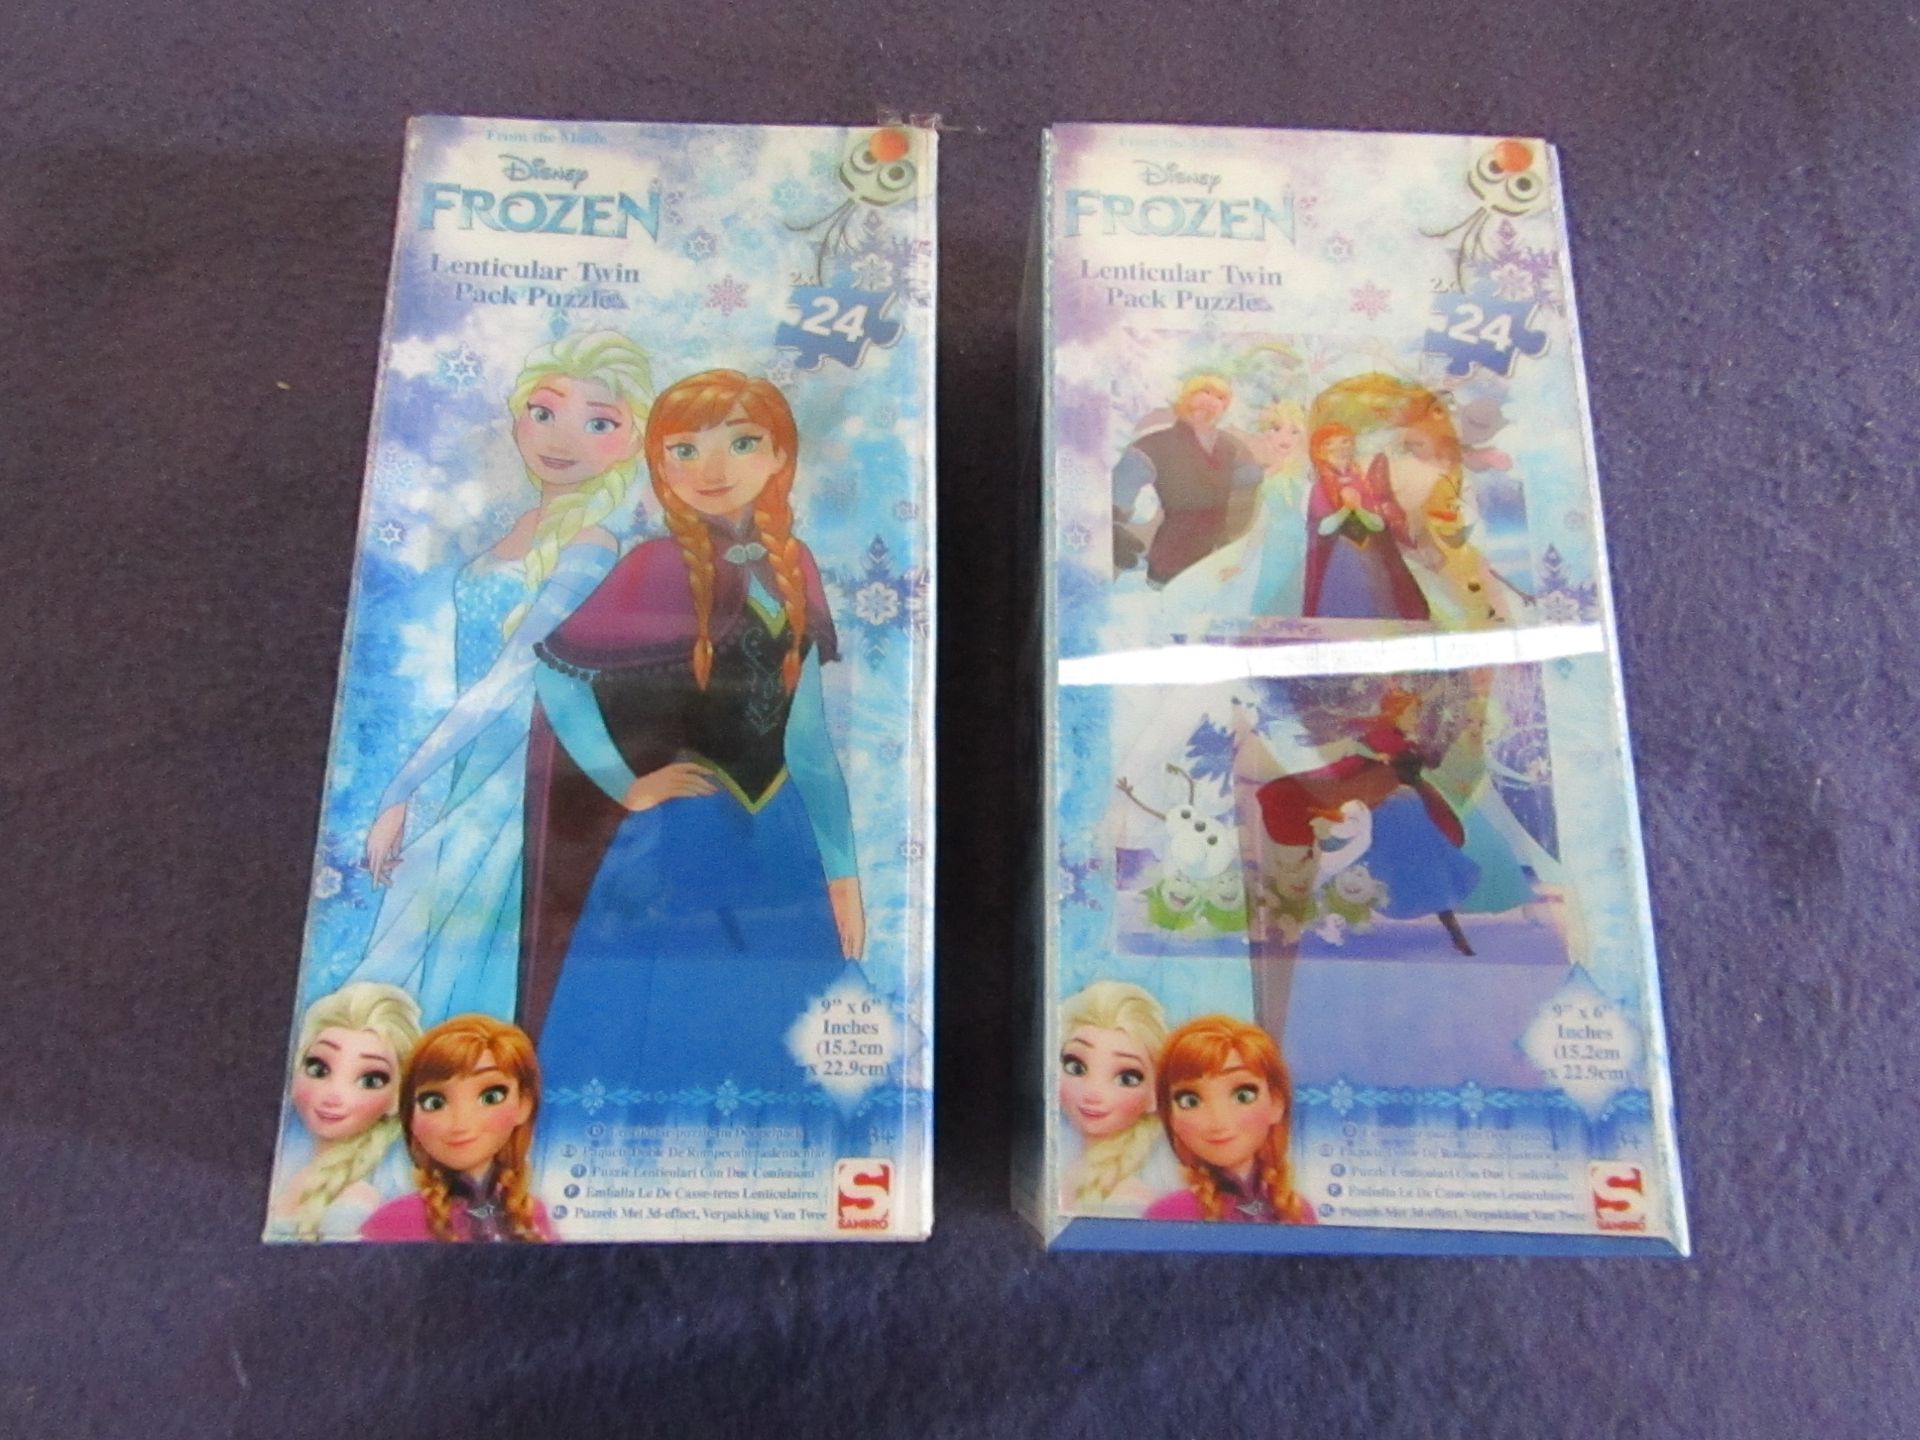 2x Disney - Frozen Lenticular Twin Pack Puzzle - Unchecked & Boxed.